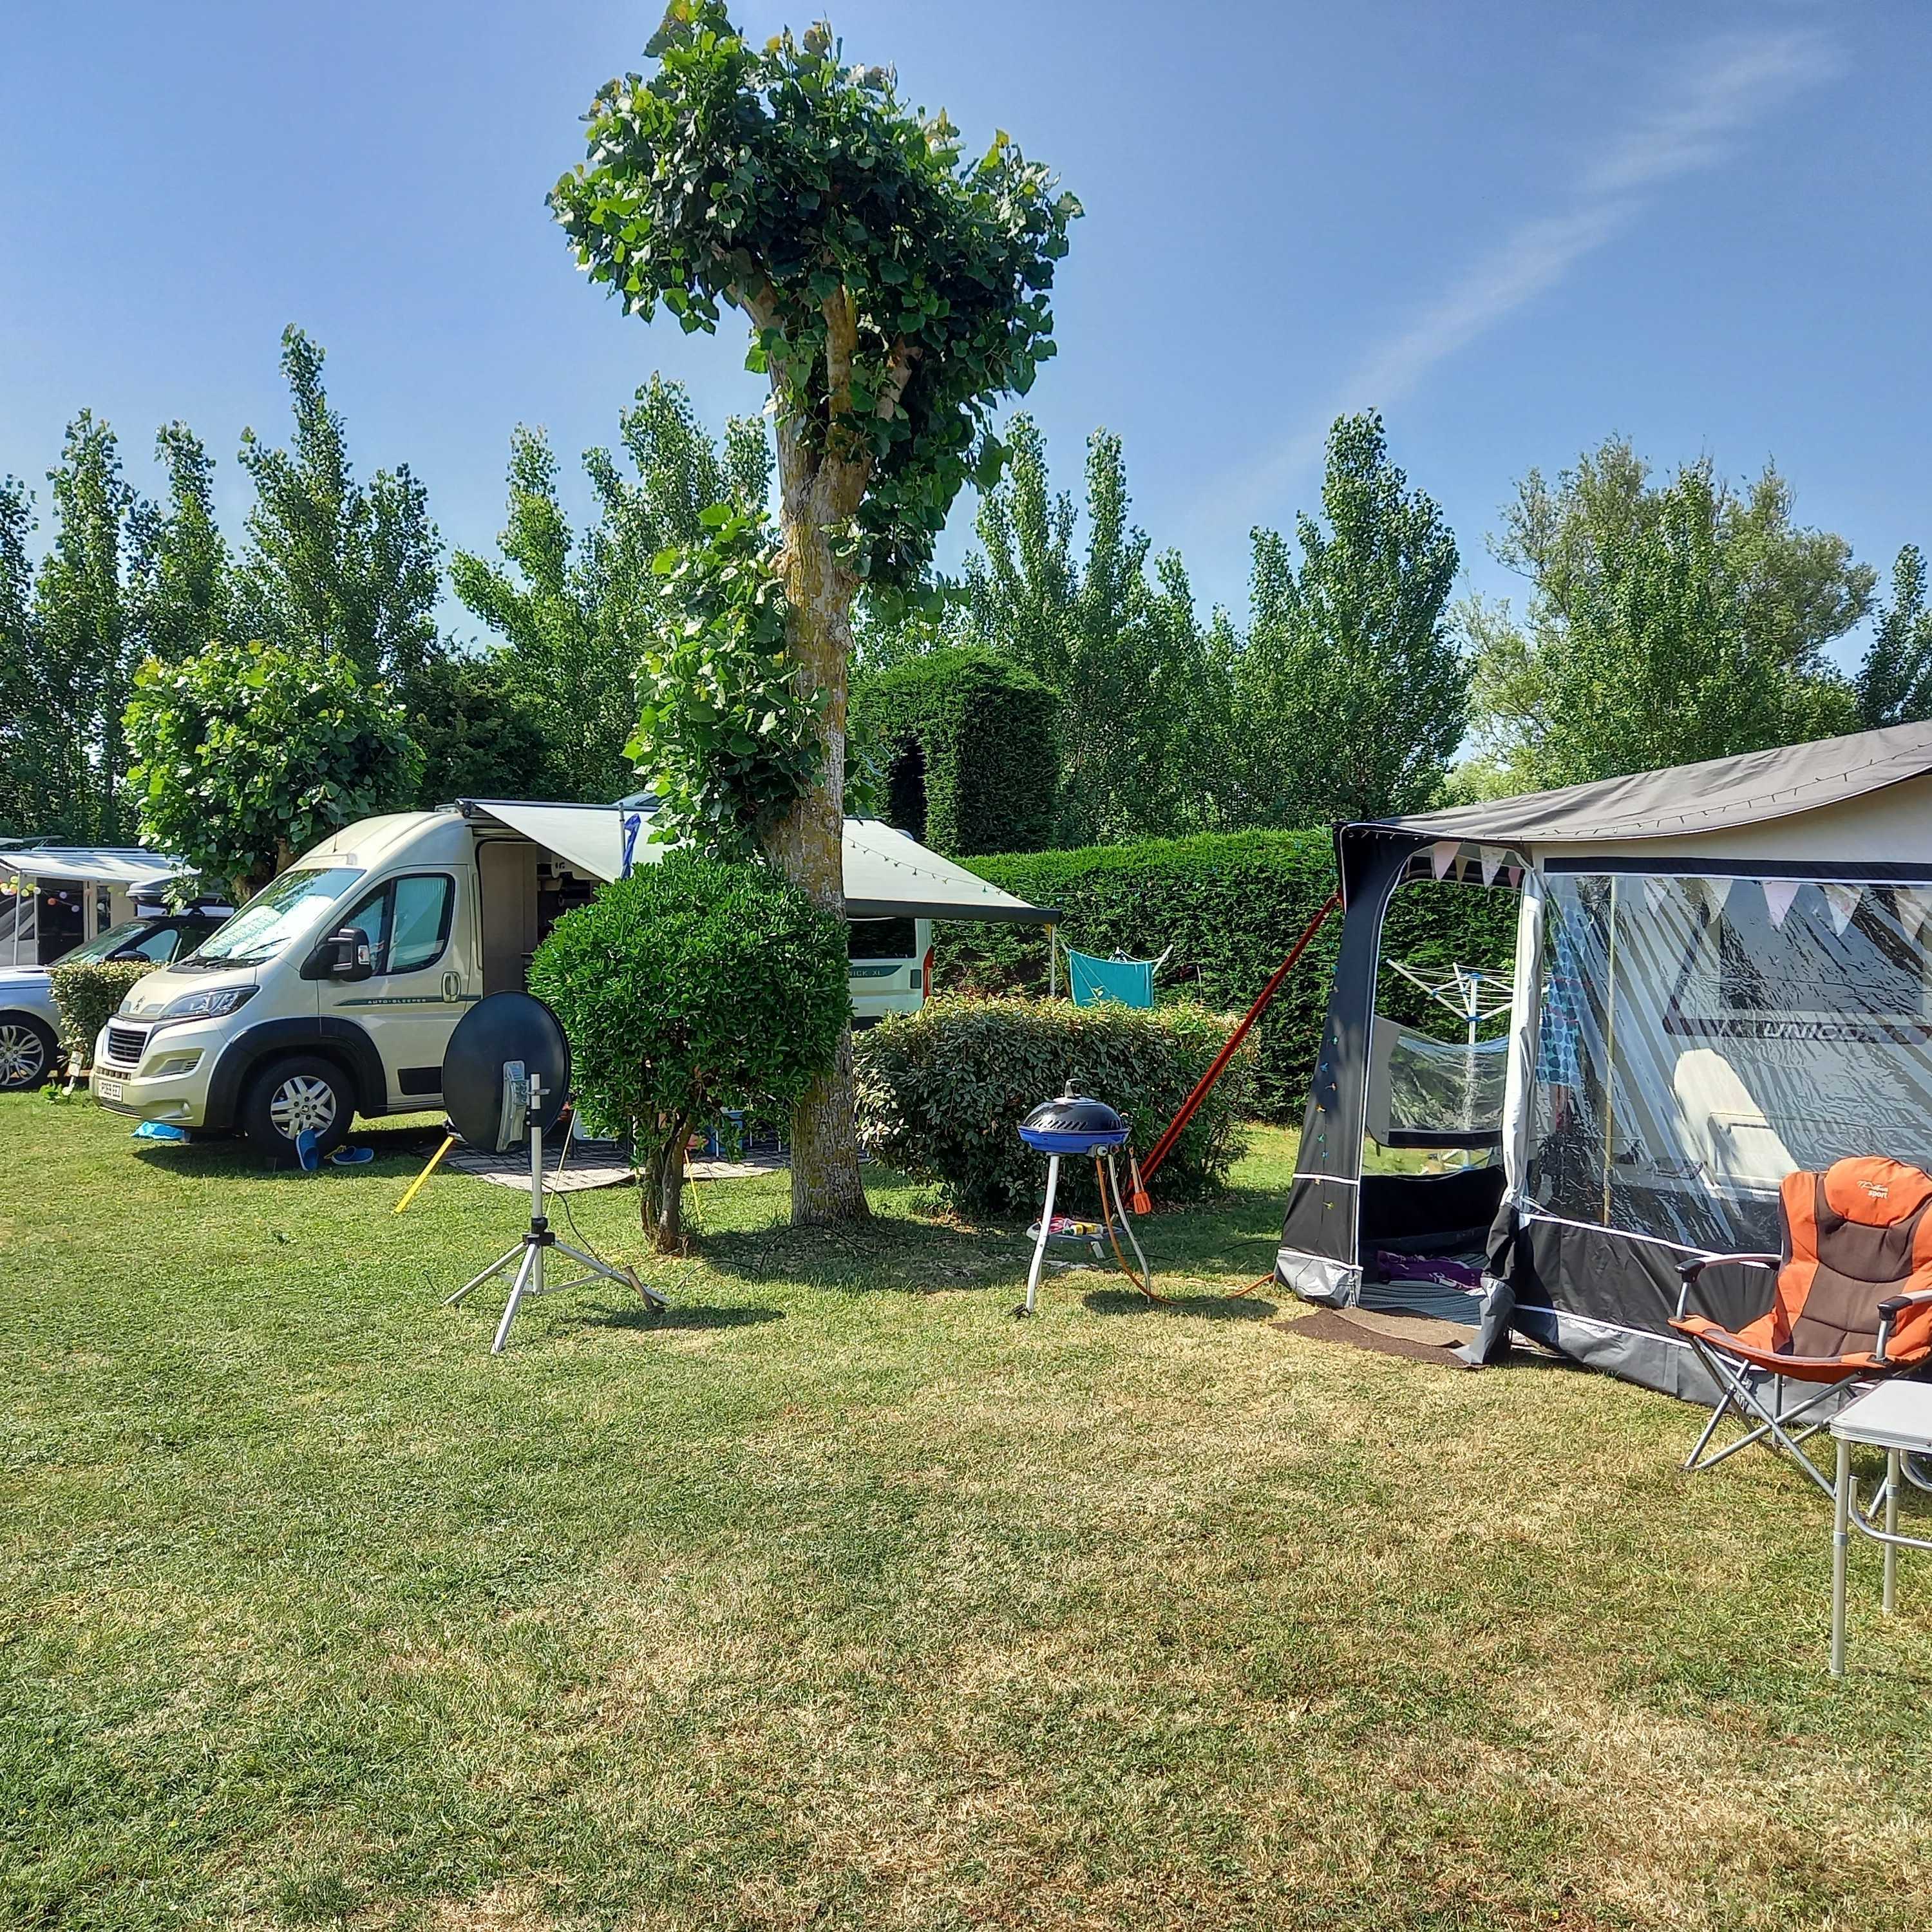 Pitch caravan  + 7.50 m  (water, electricity, drain, 2 people and 1 vehicle) 1/2 Ppl. 1/2 Ppl.